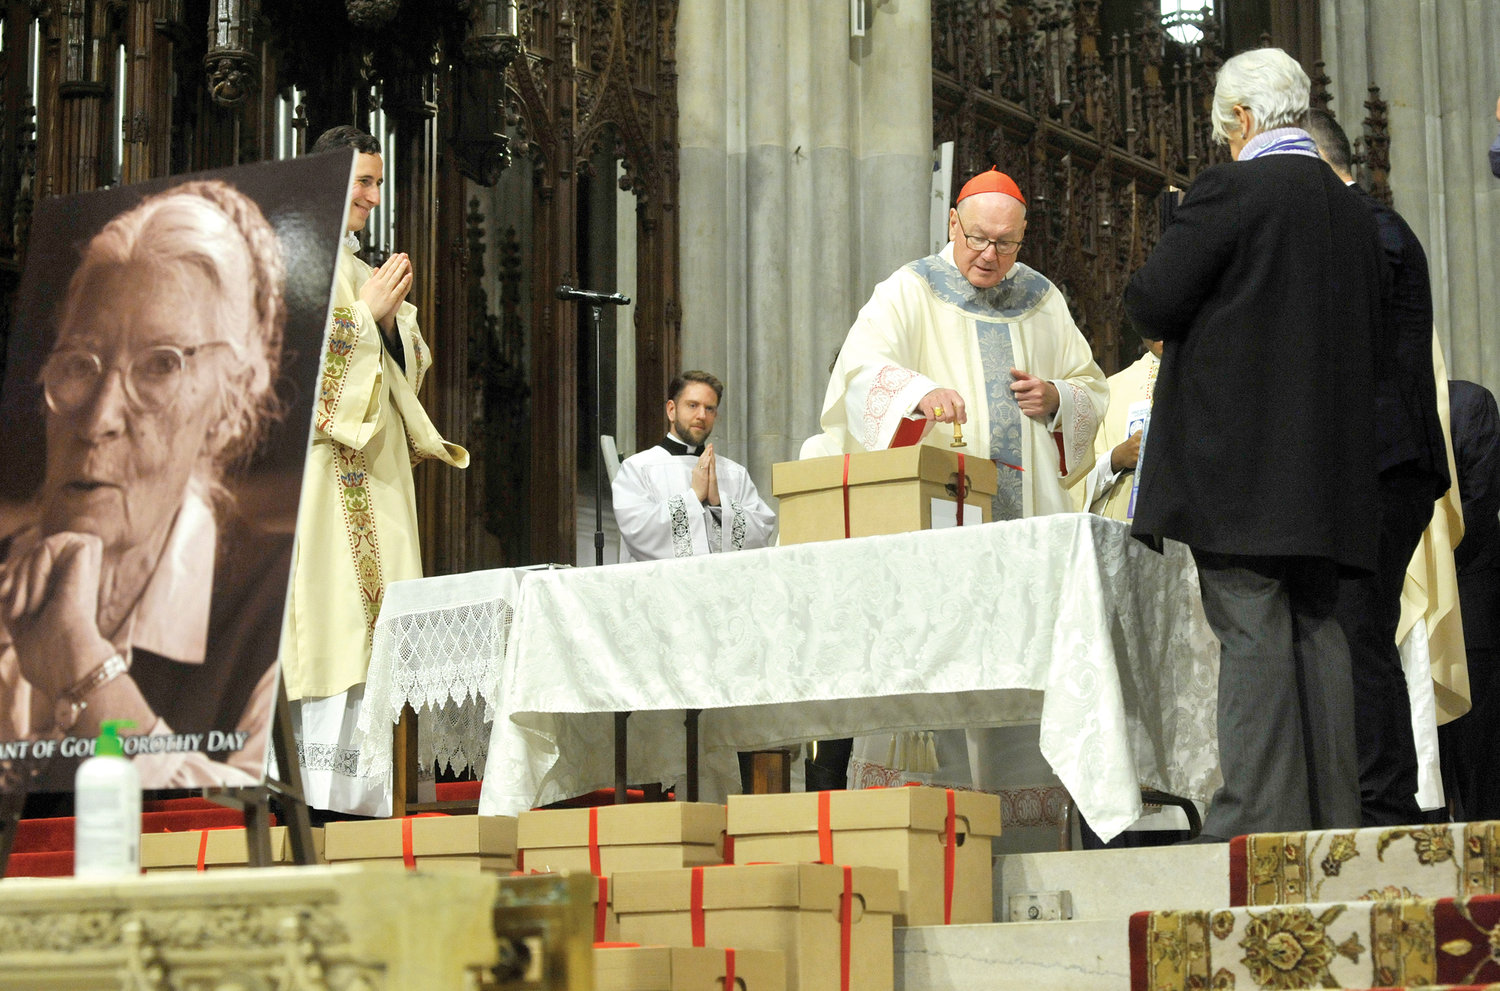 Cardinal Dolan stamps a heated wax seal atop a ribbon on a box, marking the conclusion of the diocesan phase of the canonization cause for Servant of God Dorothy Day during Mass he celebrated Dec. 8 at St. Patrick’s Cathedral.